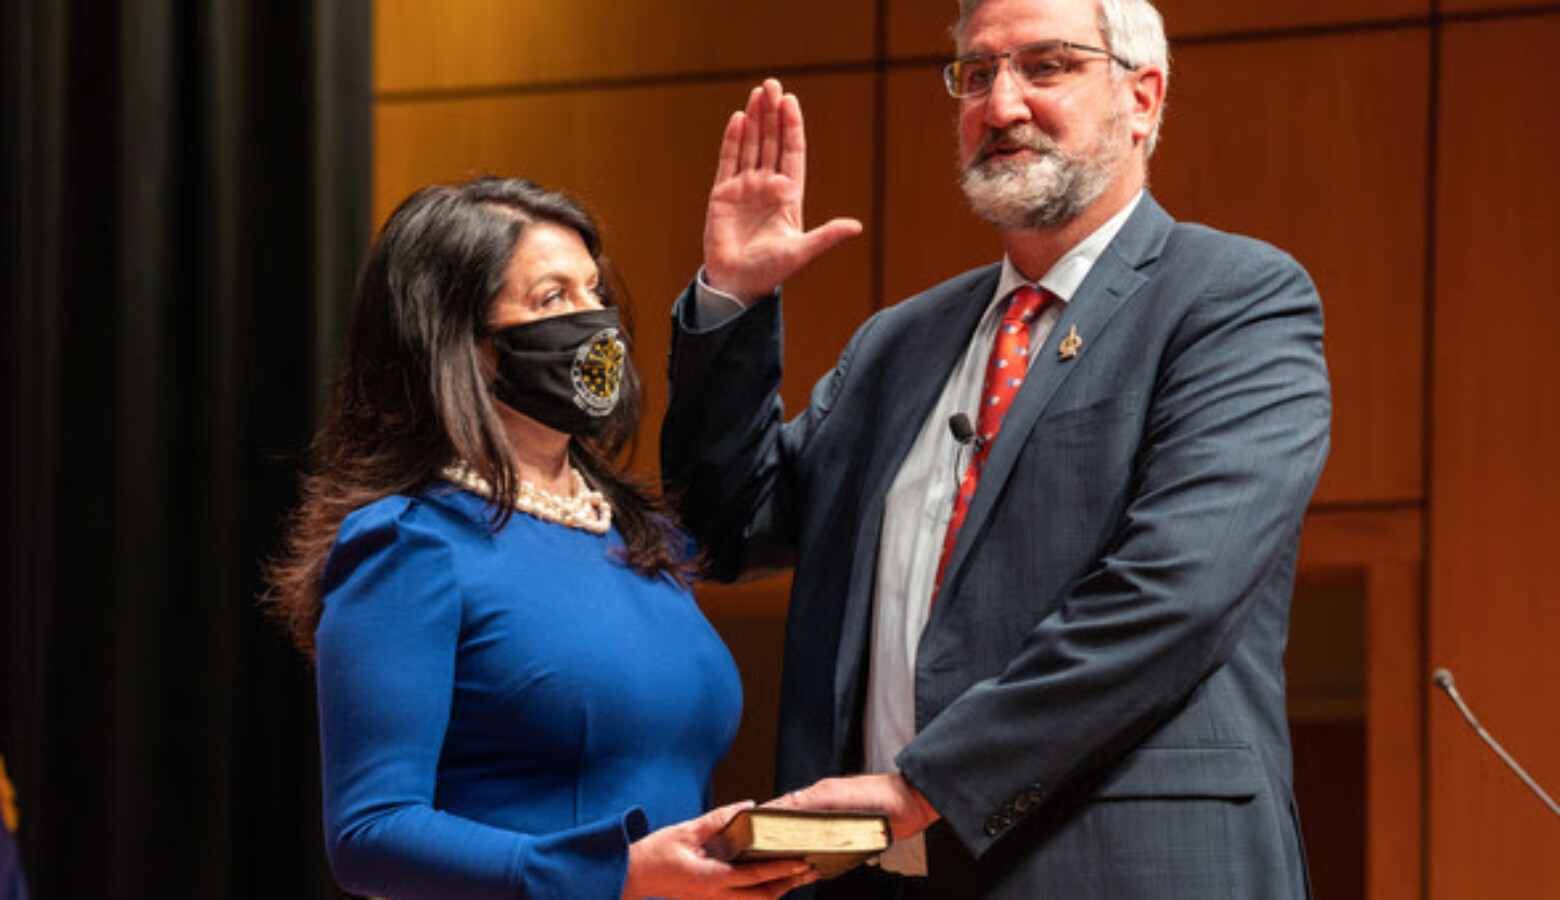 Gov. Eric Holcomb, alongside his wife Janet, is sworn in for his second term as Indiana governor. (Courtesy of the governor's office)